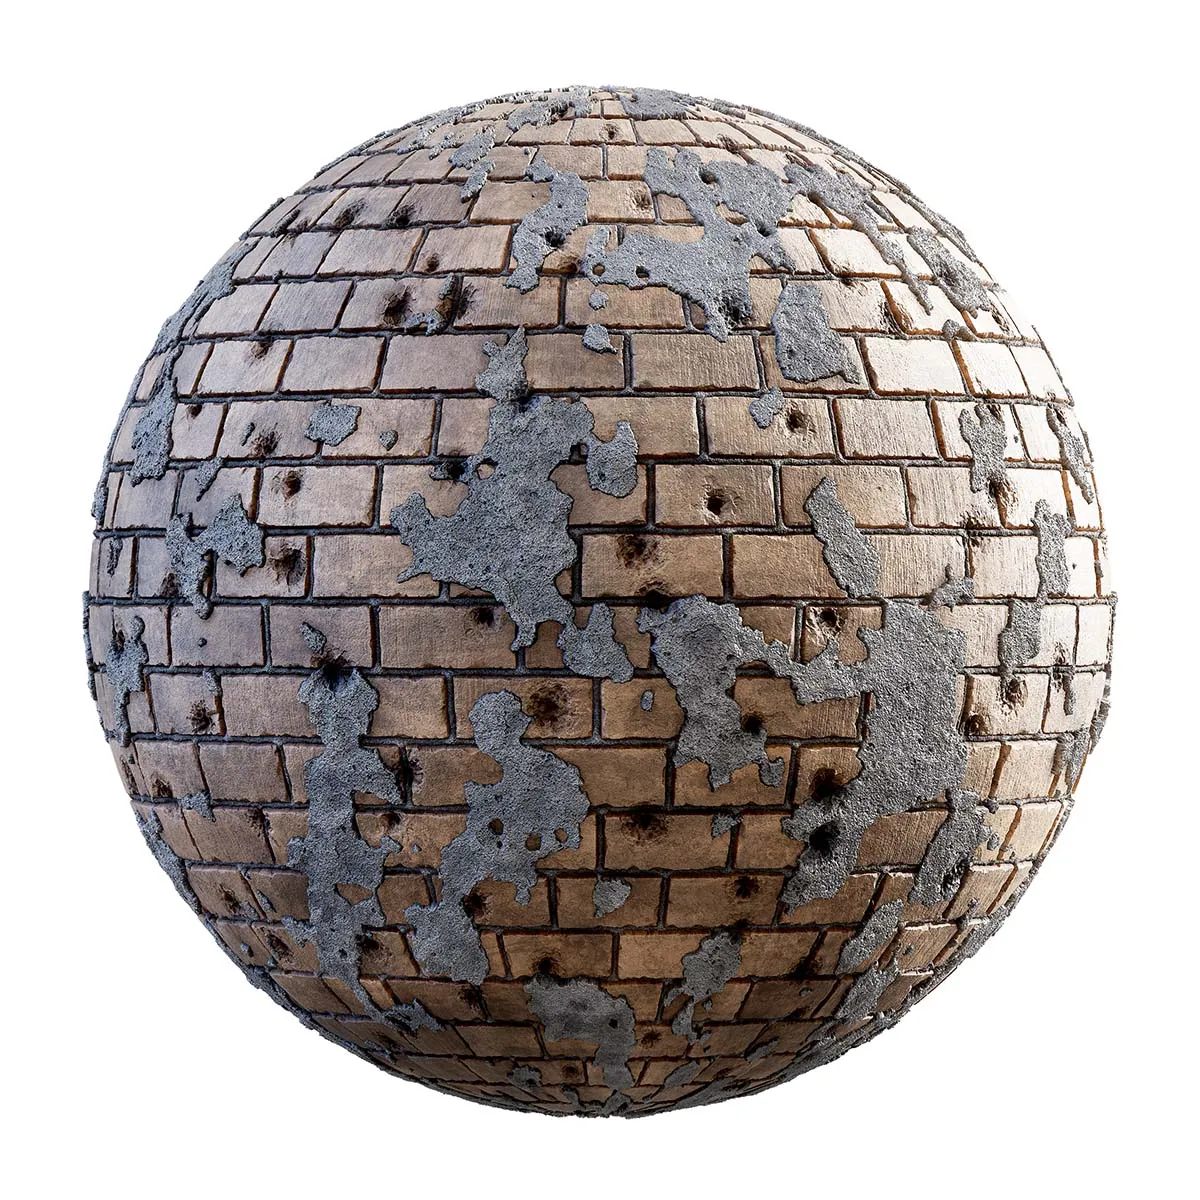 CGAxis PBR 28 – Brick Wall With Bullet Holes 31 38